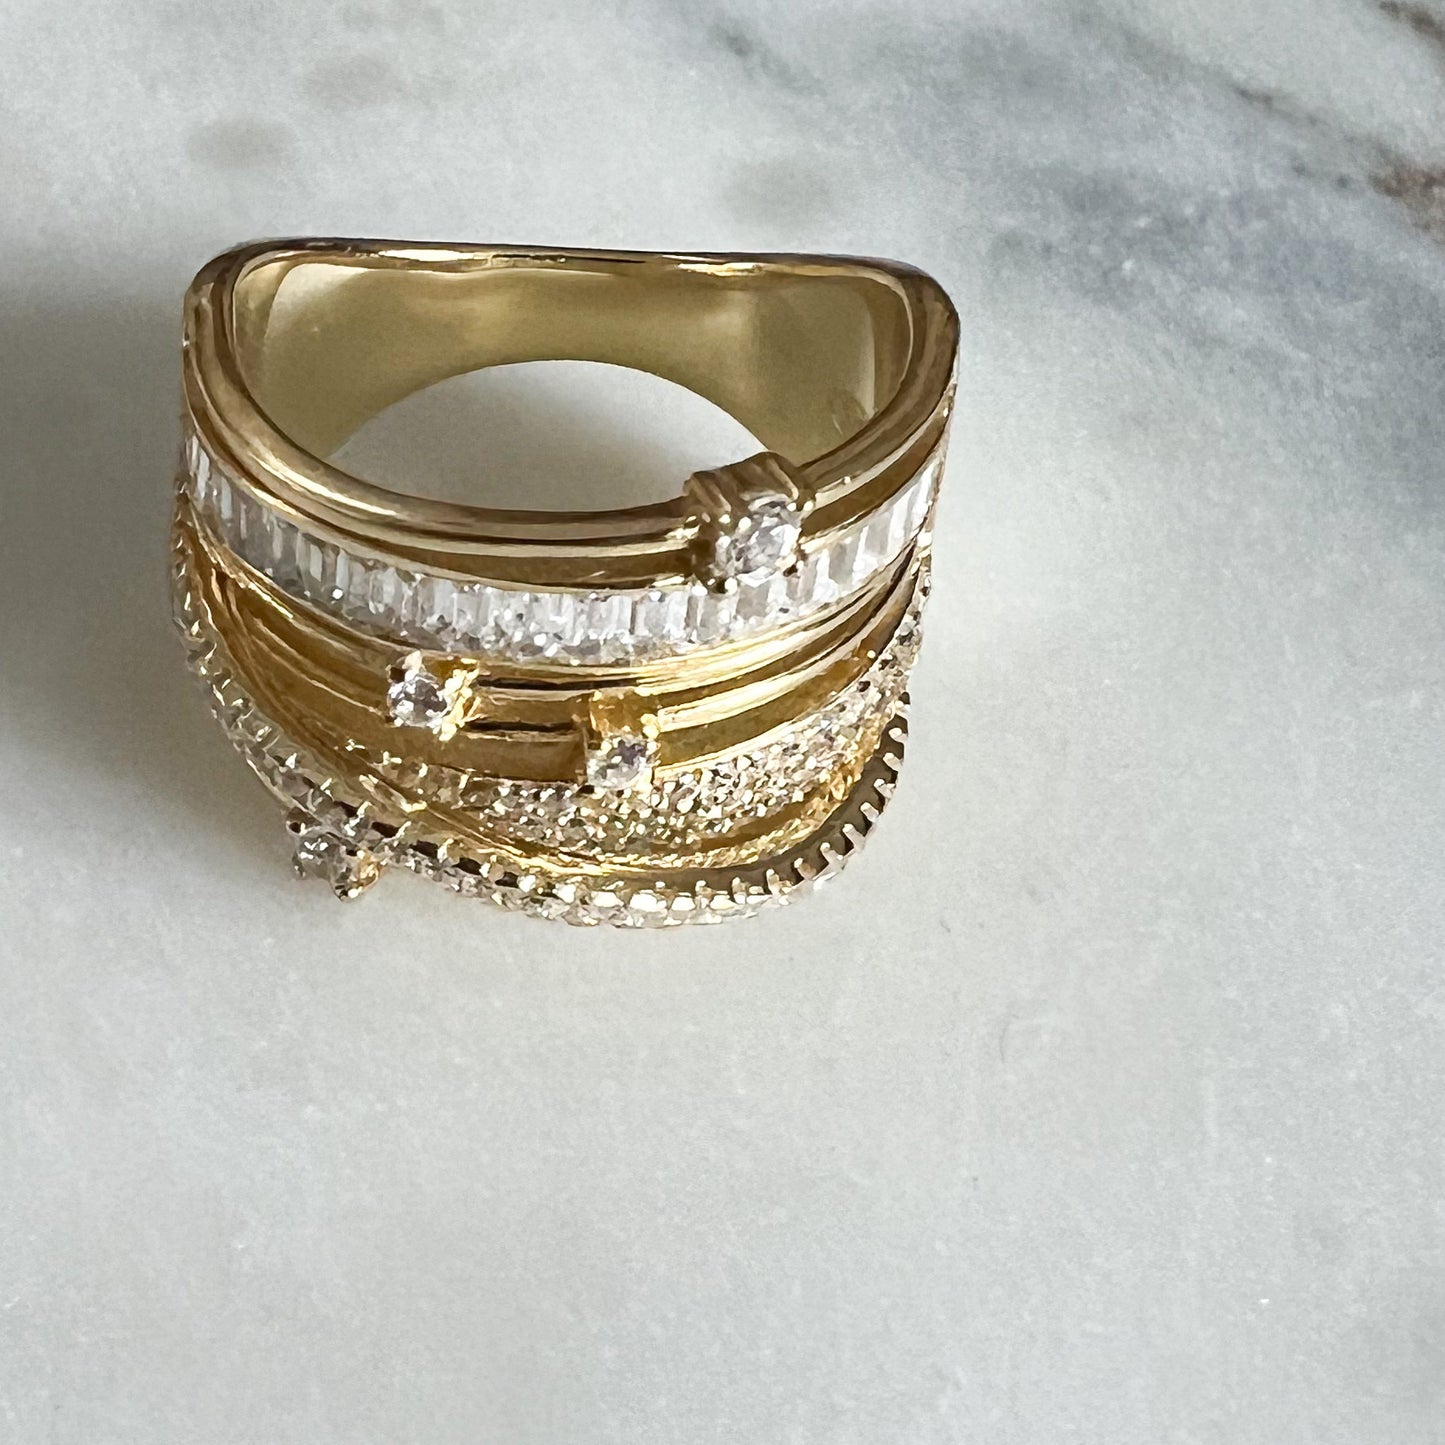 Galaxy Gold Sterling Silver 925 Ring Size 7 - BelleStyle